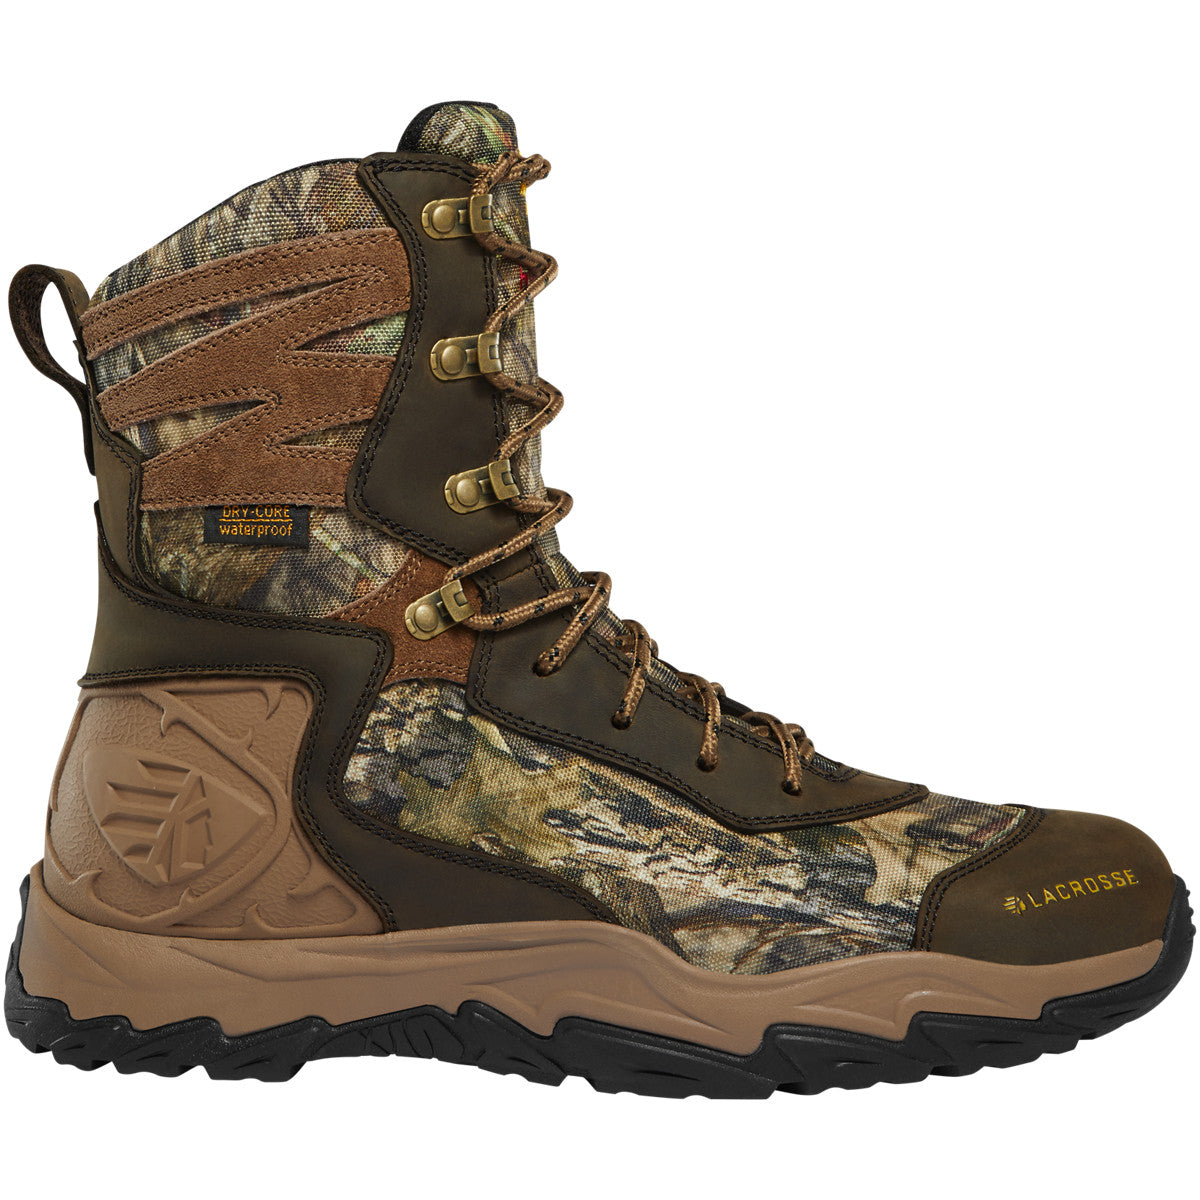 Lacrosse Men's Windrose 8" WP 600g Thinsulate Hunt Boot - 513361 7 / Medium / Mossy Oak Break-Up Country - Overlook Boots